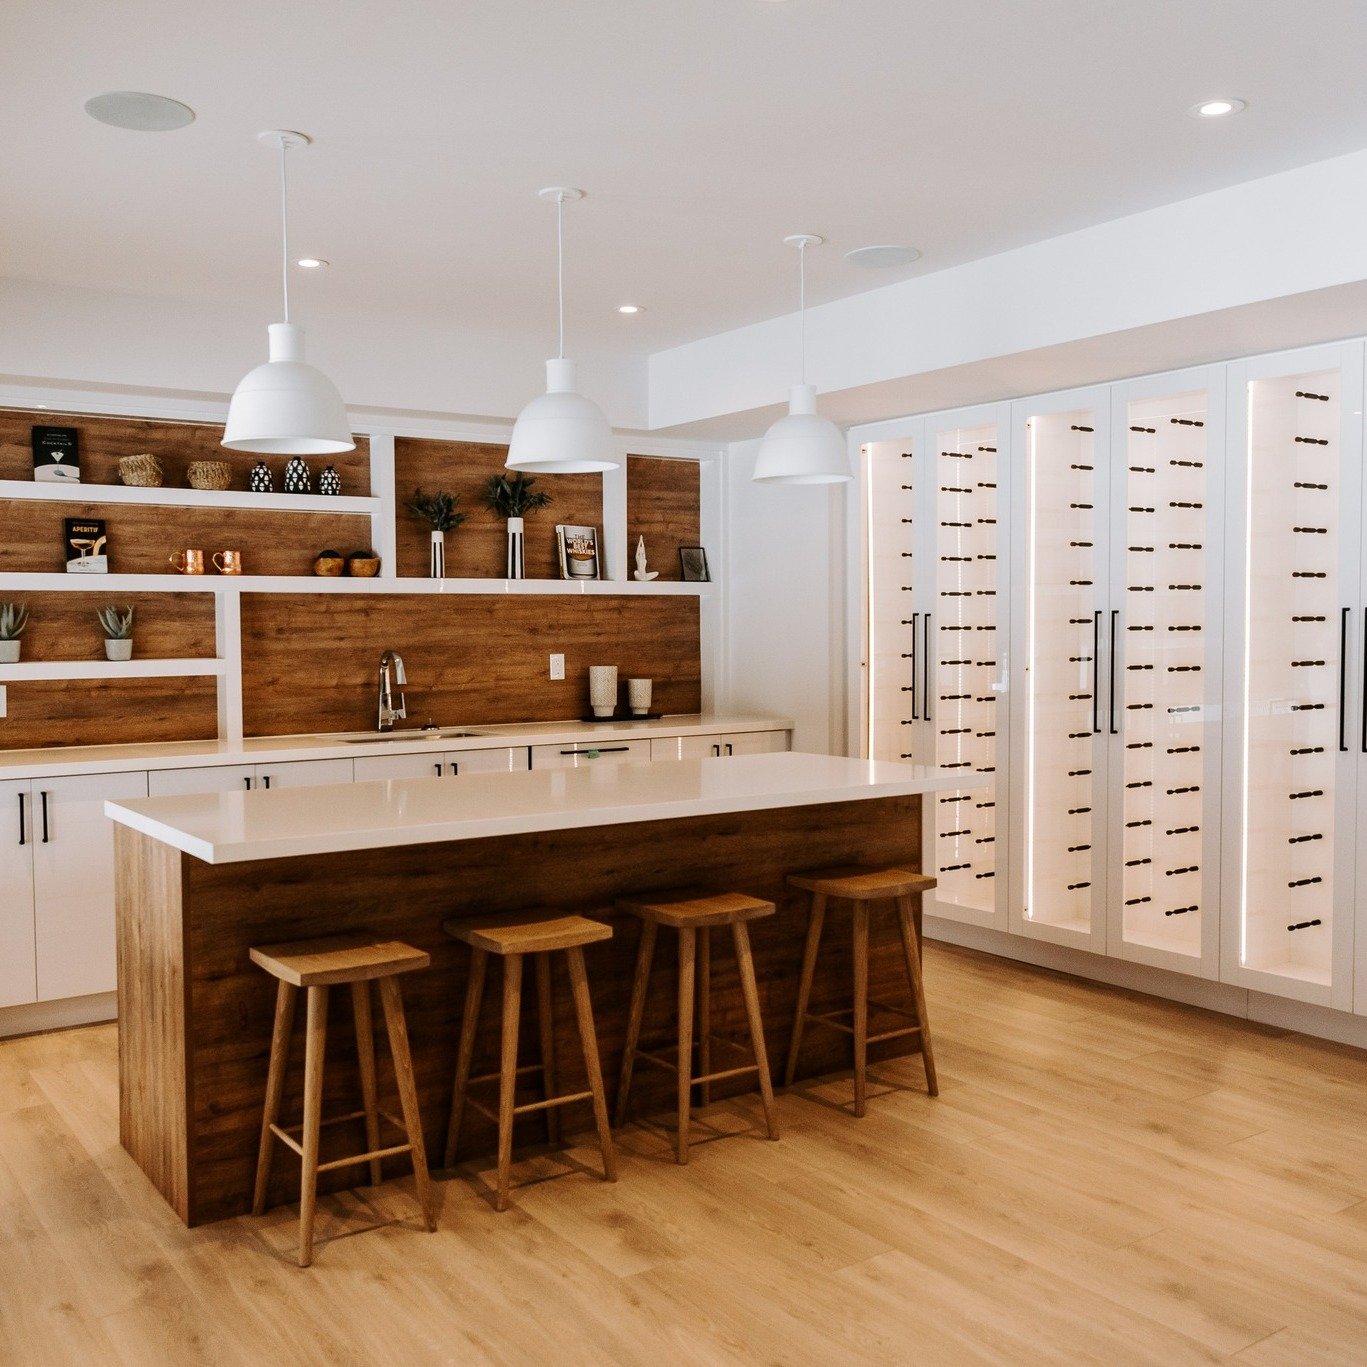 We love designing basements ready for entertaining!
This white kitchen with wood accents feels warm and elegant and the built-in wine cellar brings the design together while giving the home owner a place to showcase their wine collection.🍾

Architec